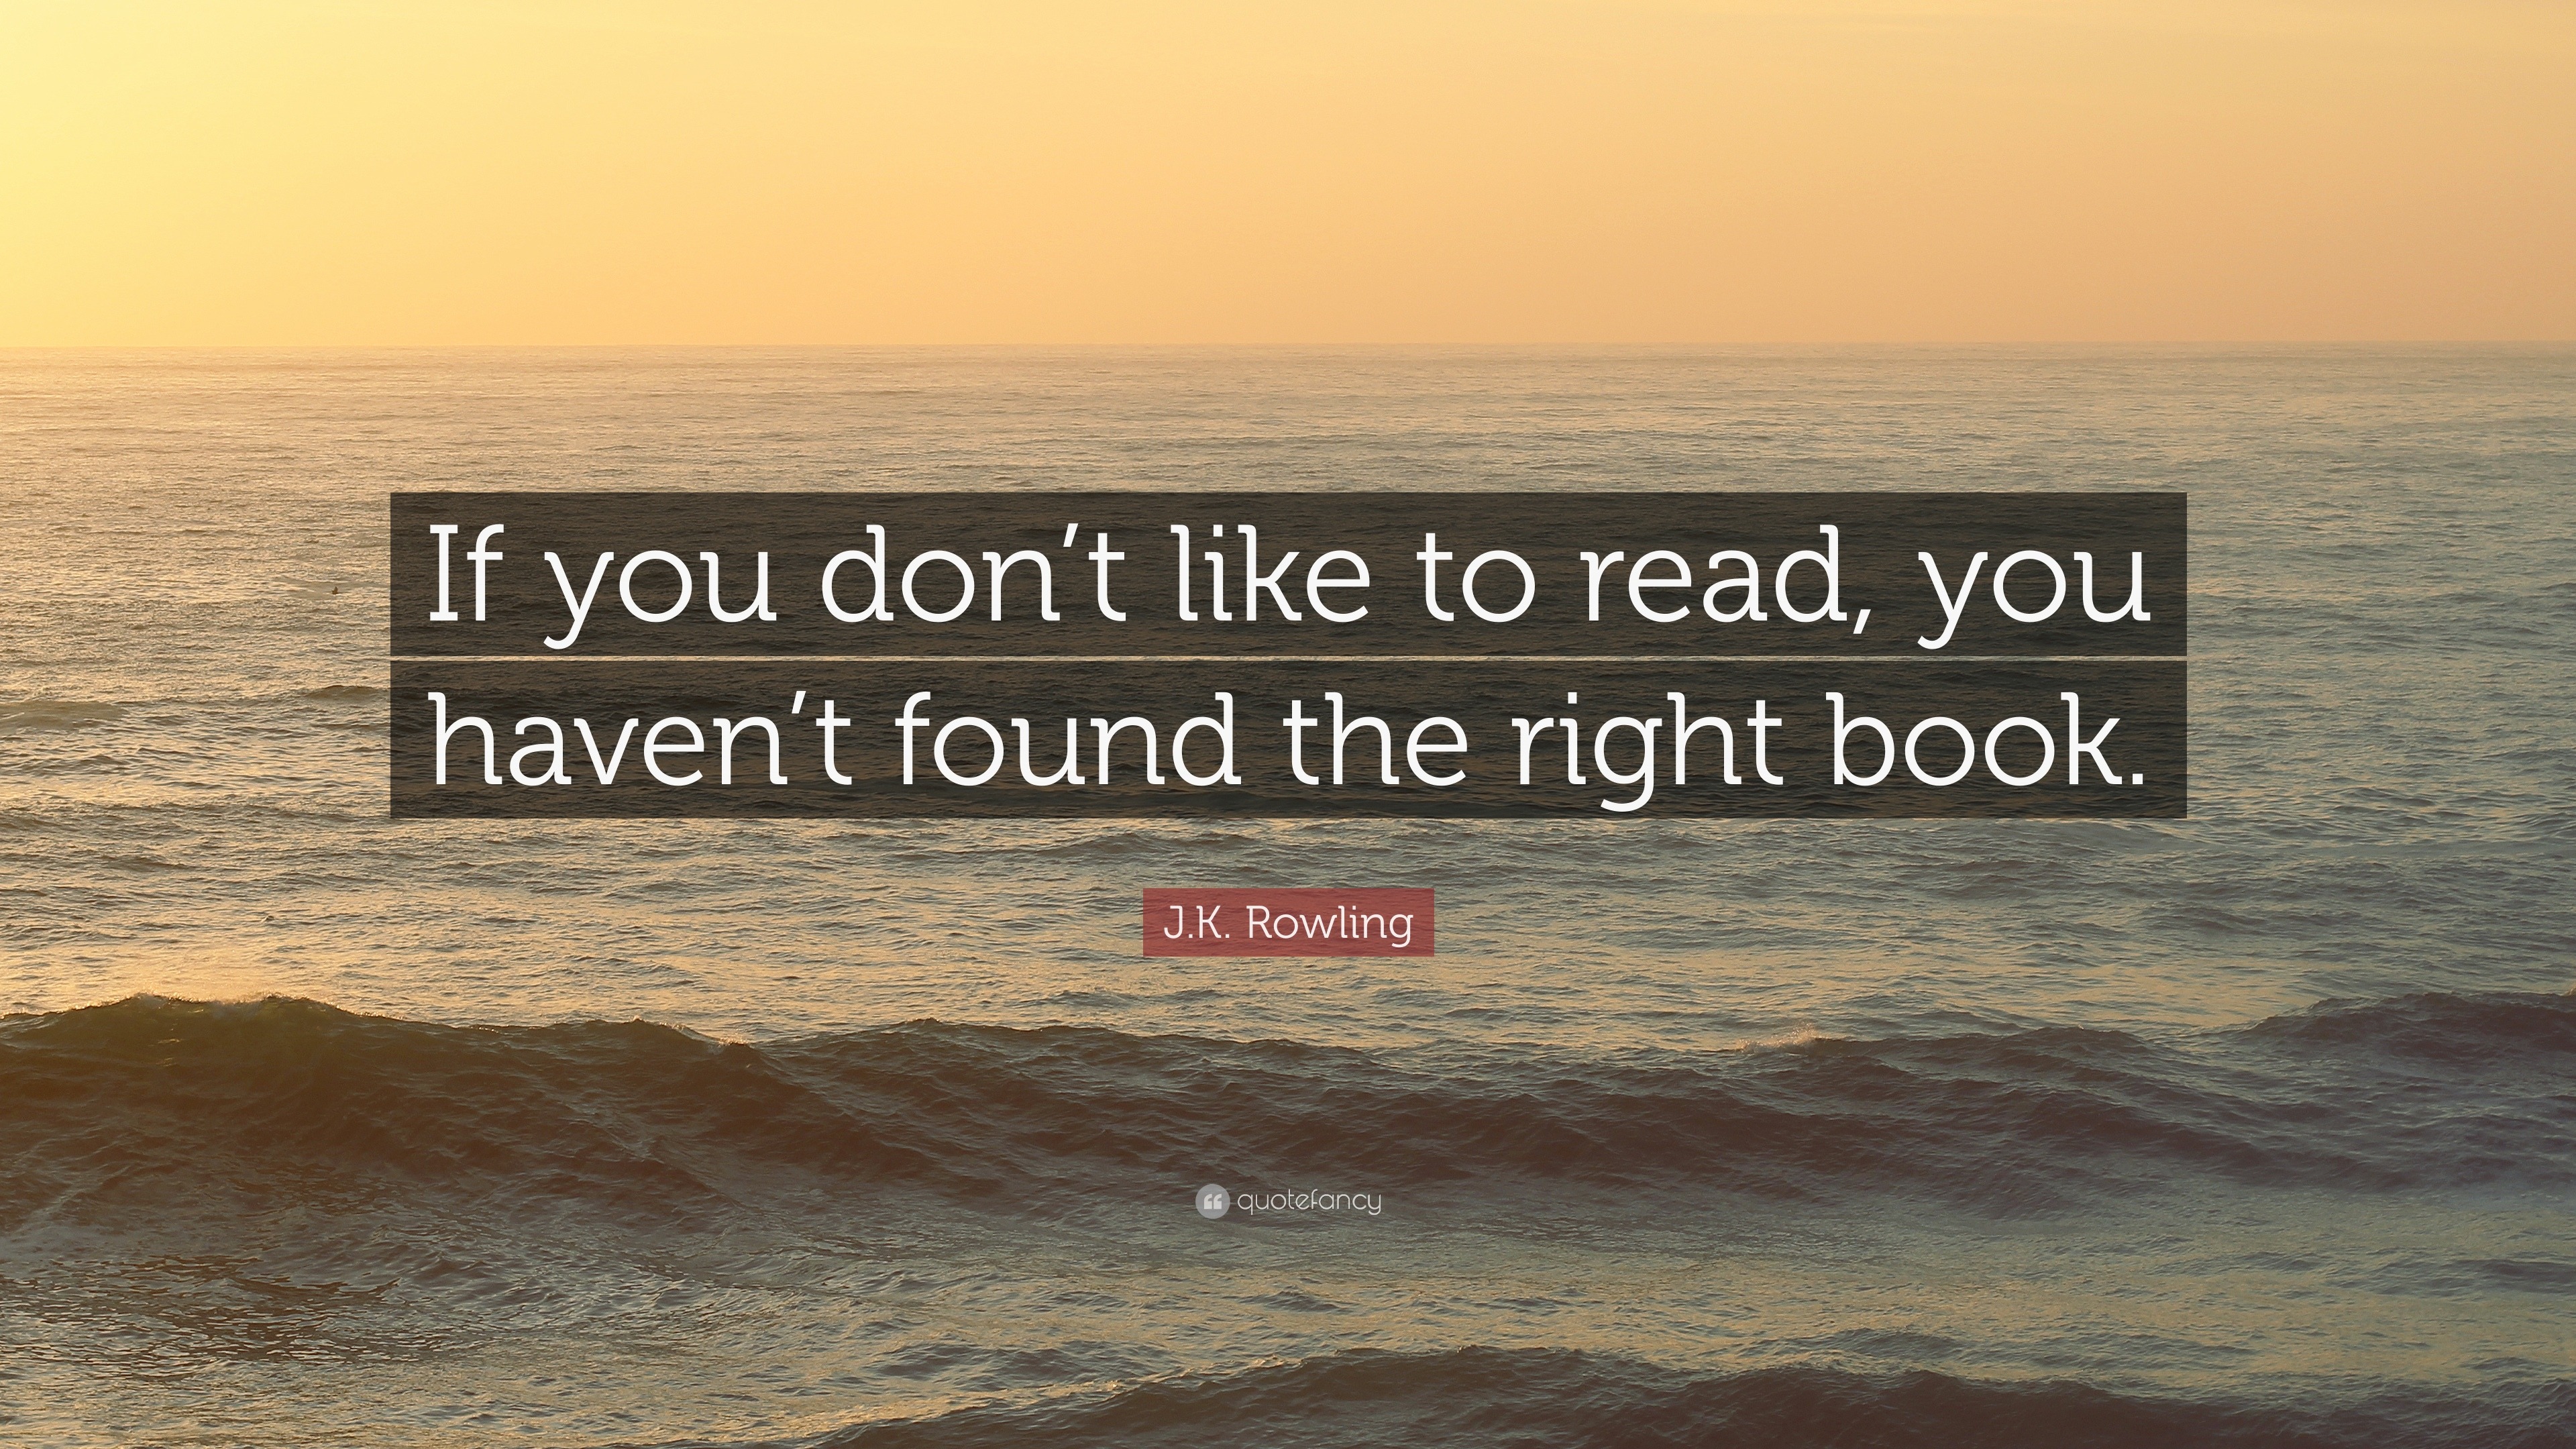 J.K. Rowling Quote: “If you don’t like to read, you haven’t found the